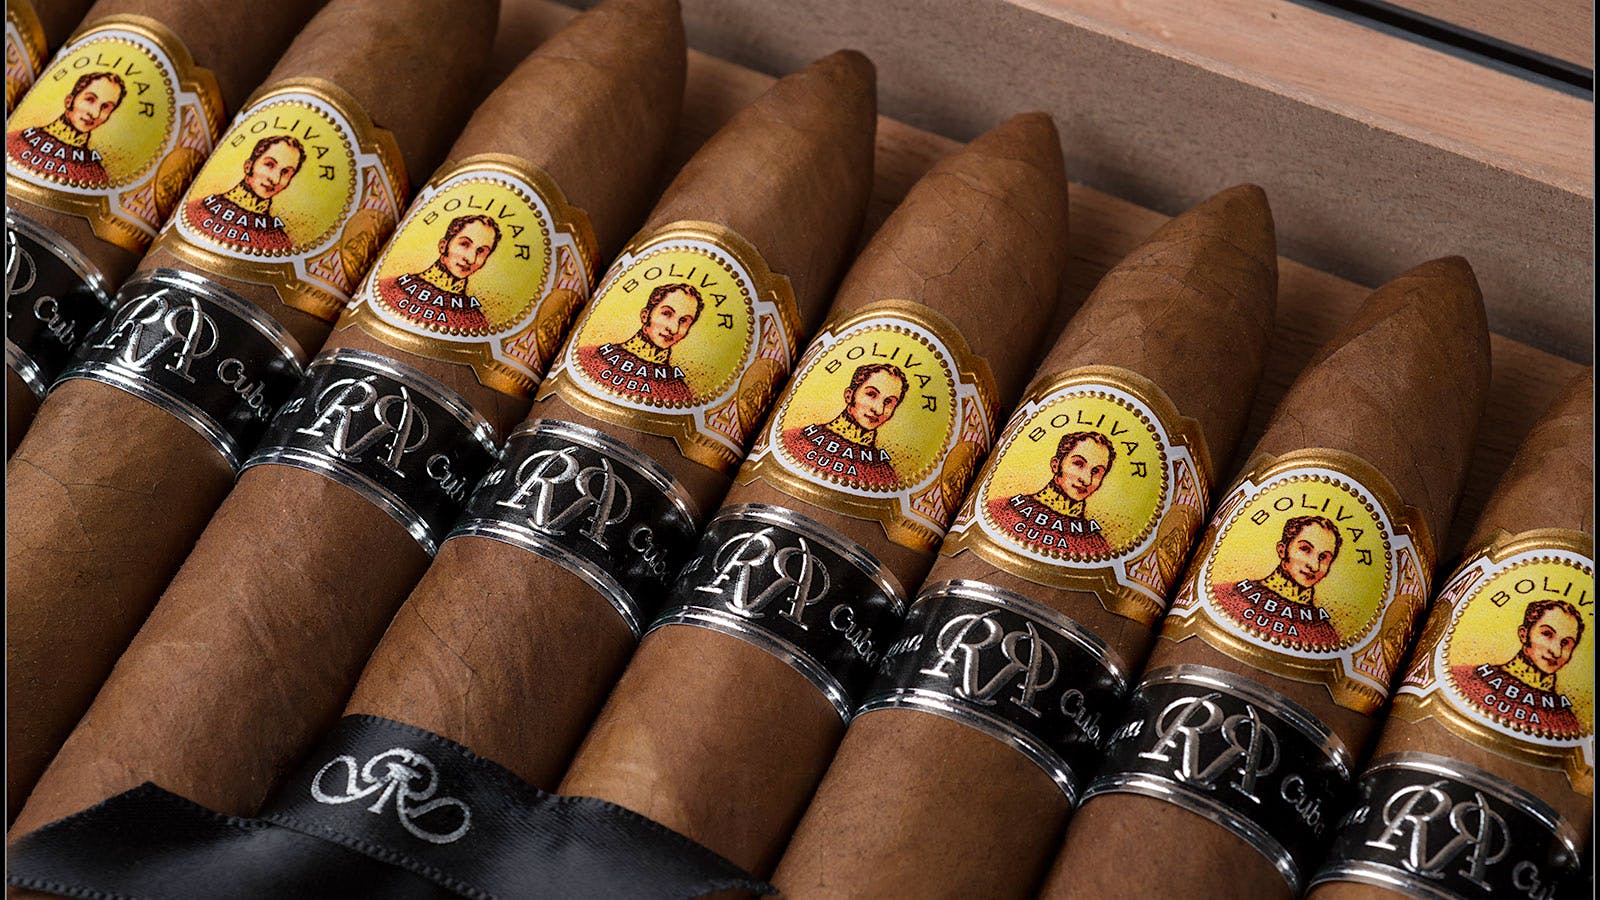 A special edition Bolivar, a Reserva Cosecha 2016. The cigar will be a Belicoso Fino, the most iconic size in the brand’s lineup.